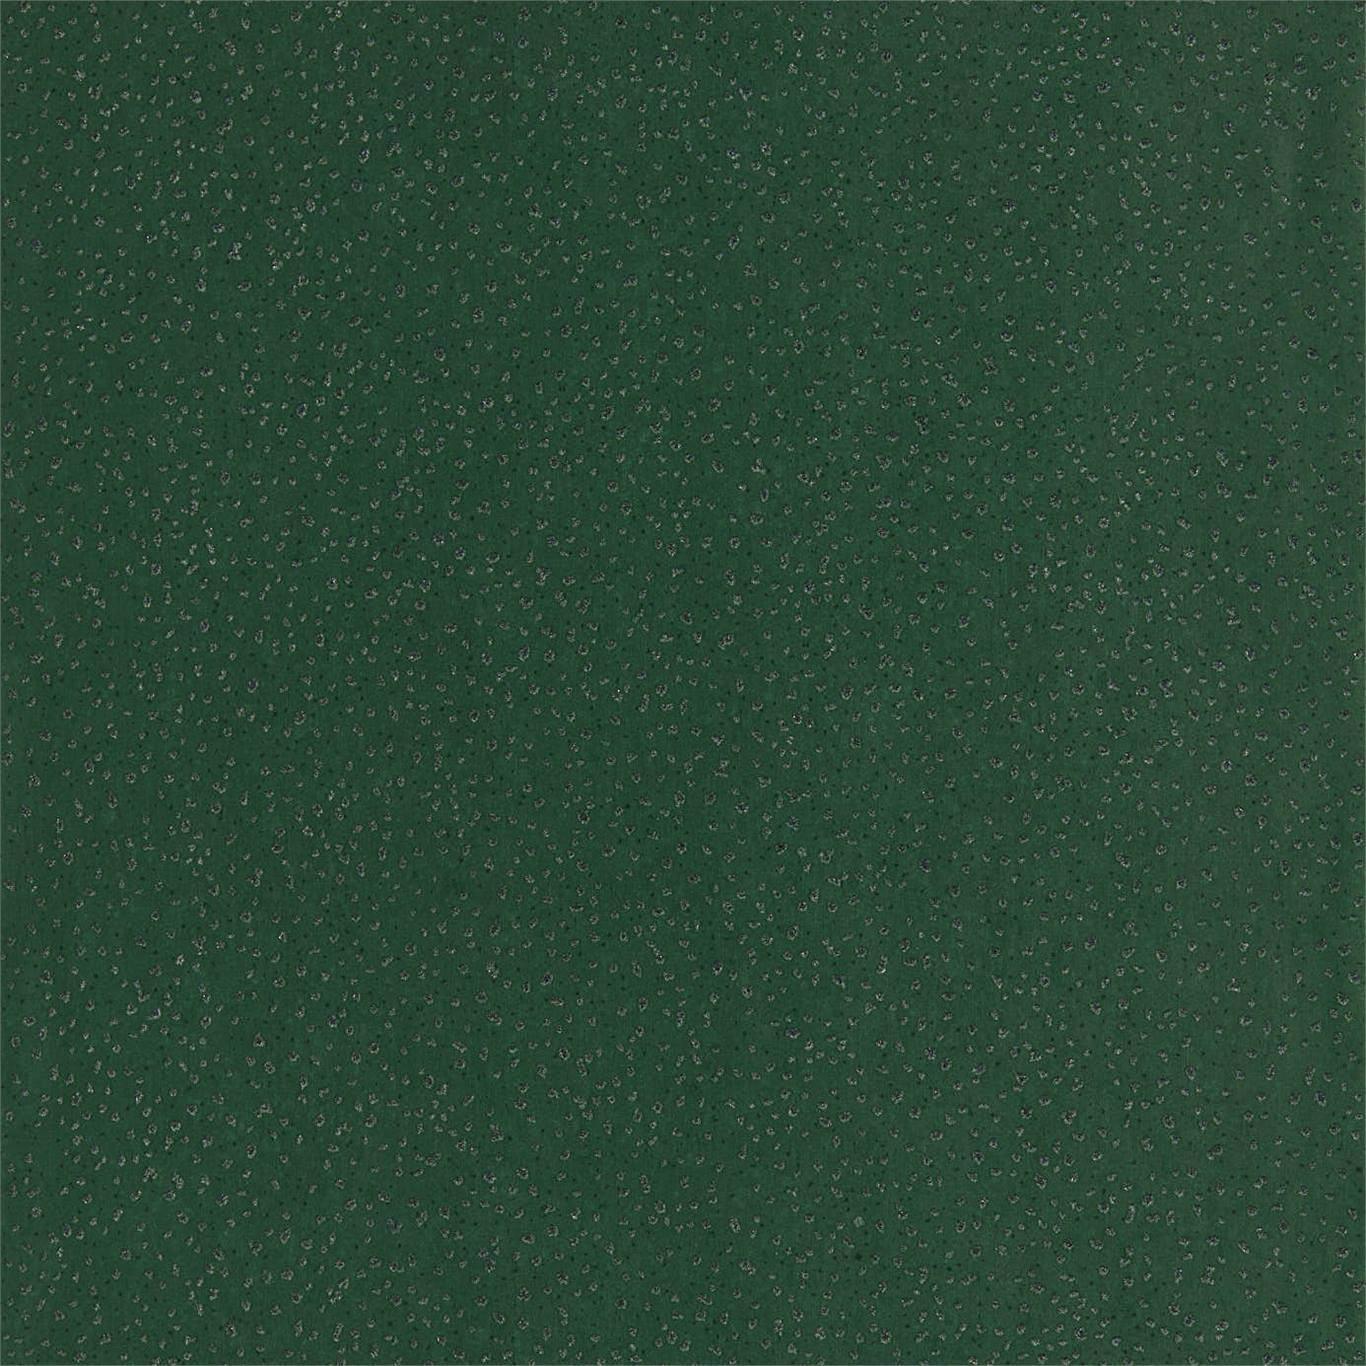 Foxy Emerald Wallpaper EANW112592 by Harlequin